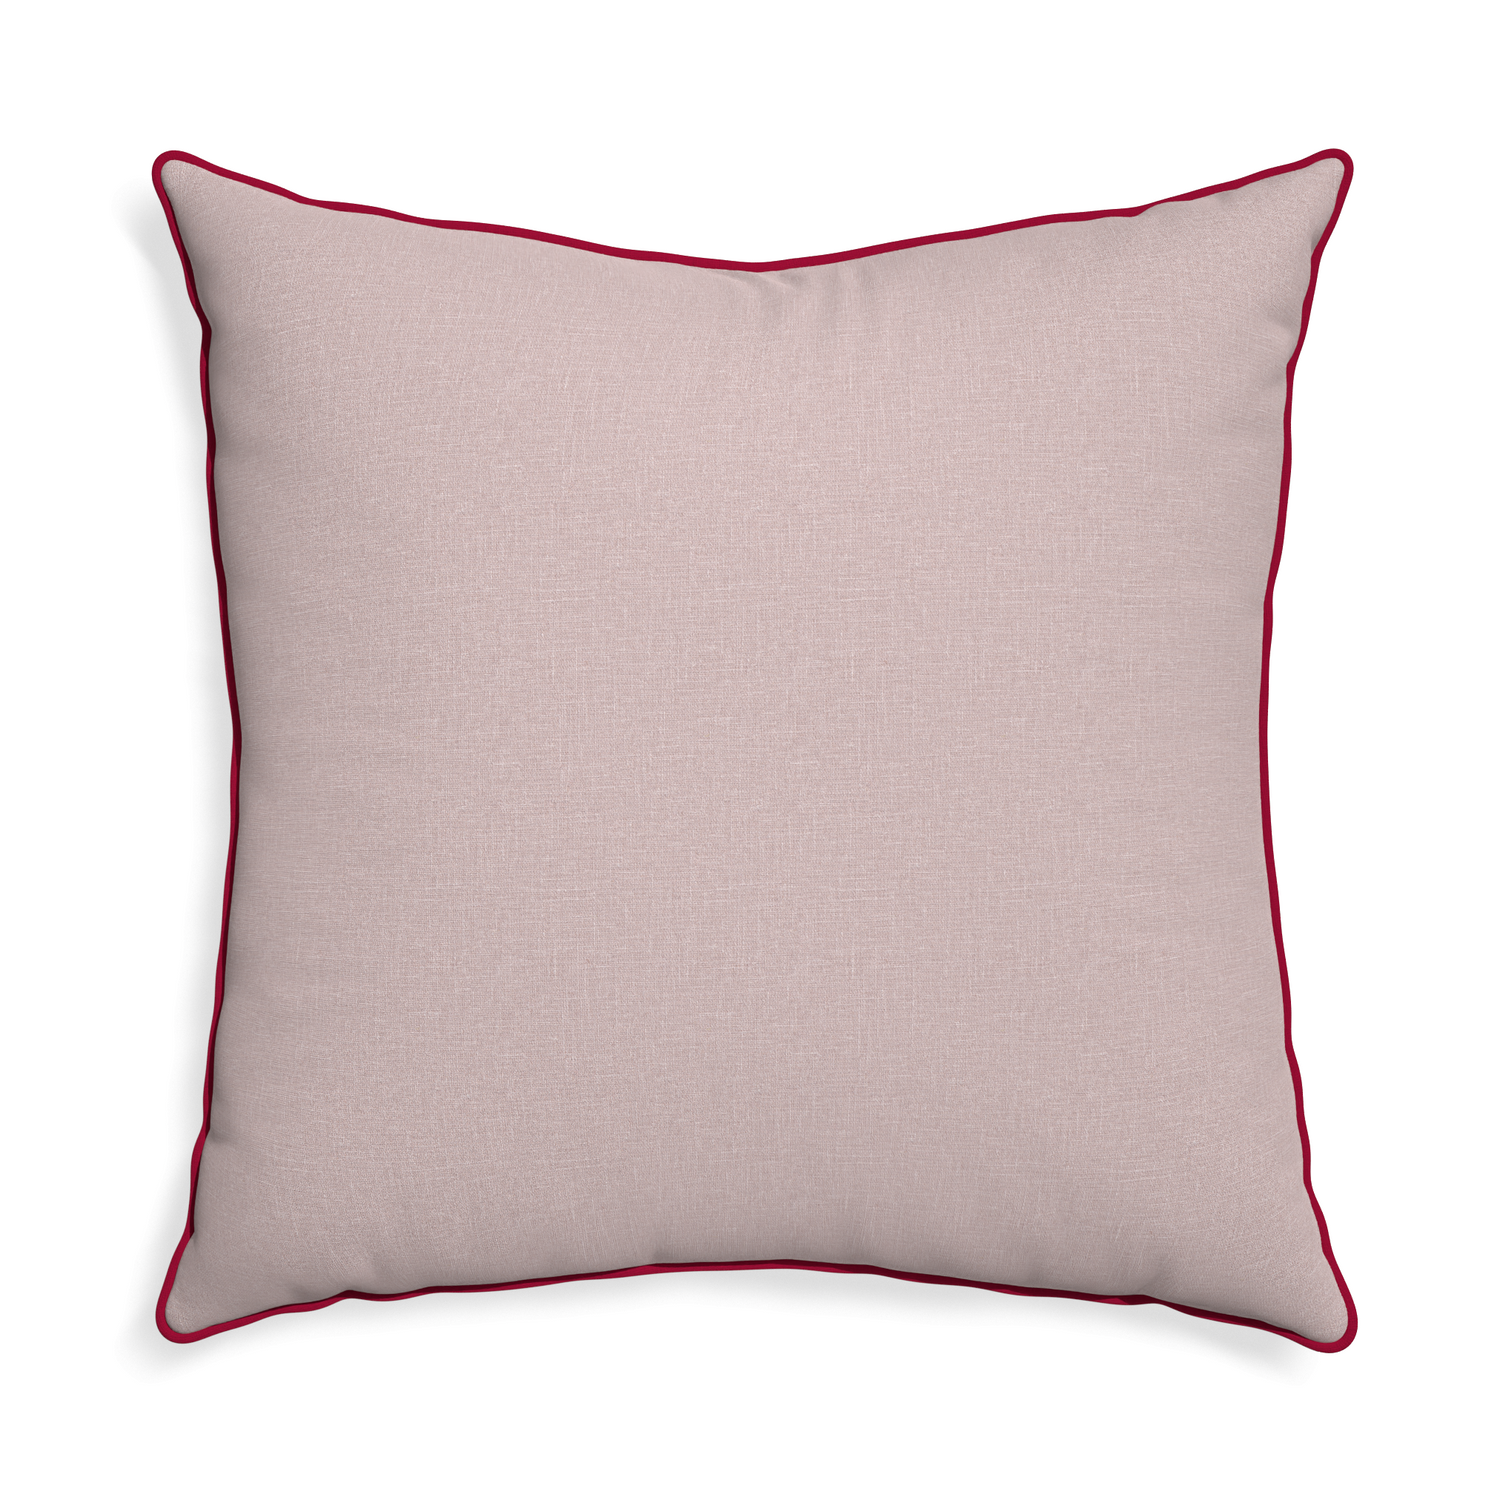 Euro-sham orchid custom mauve pinkpillow with raspberry piping on white background